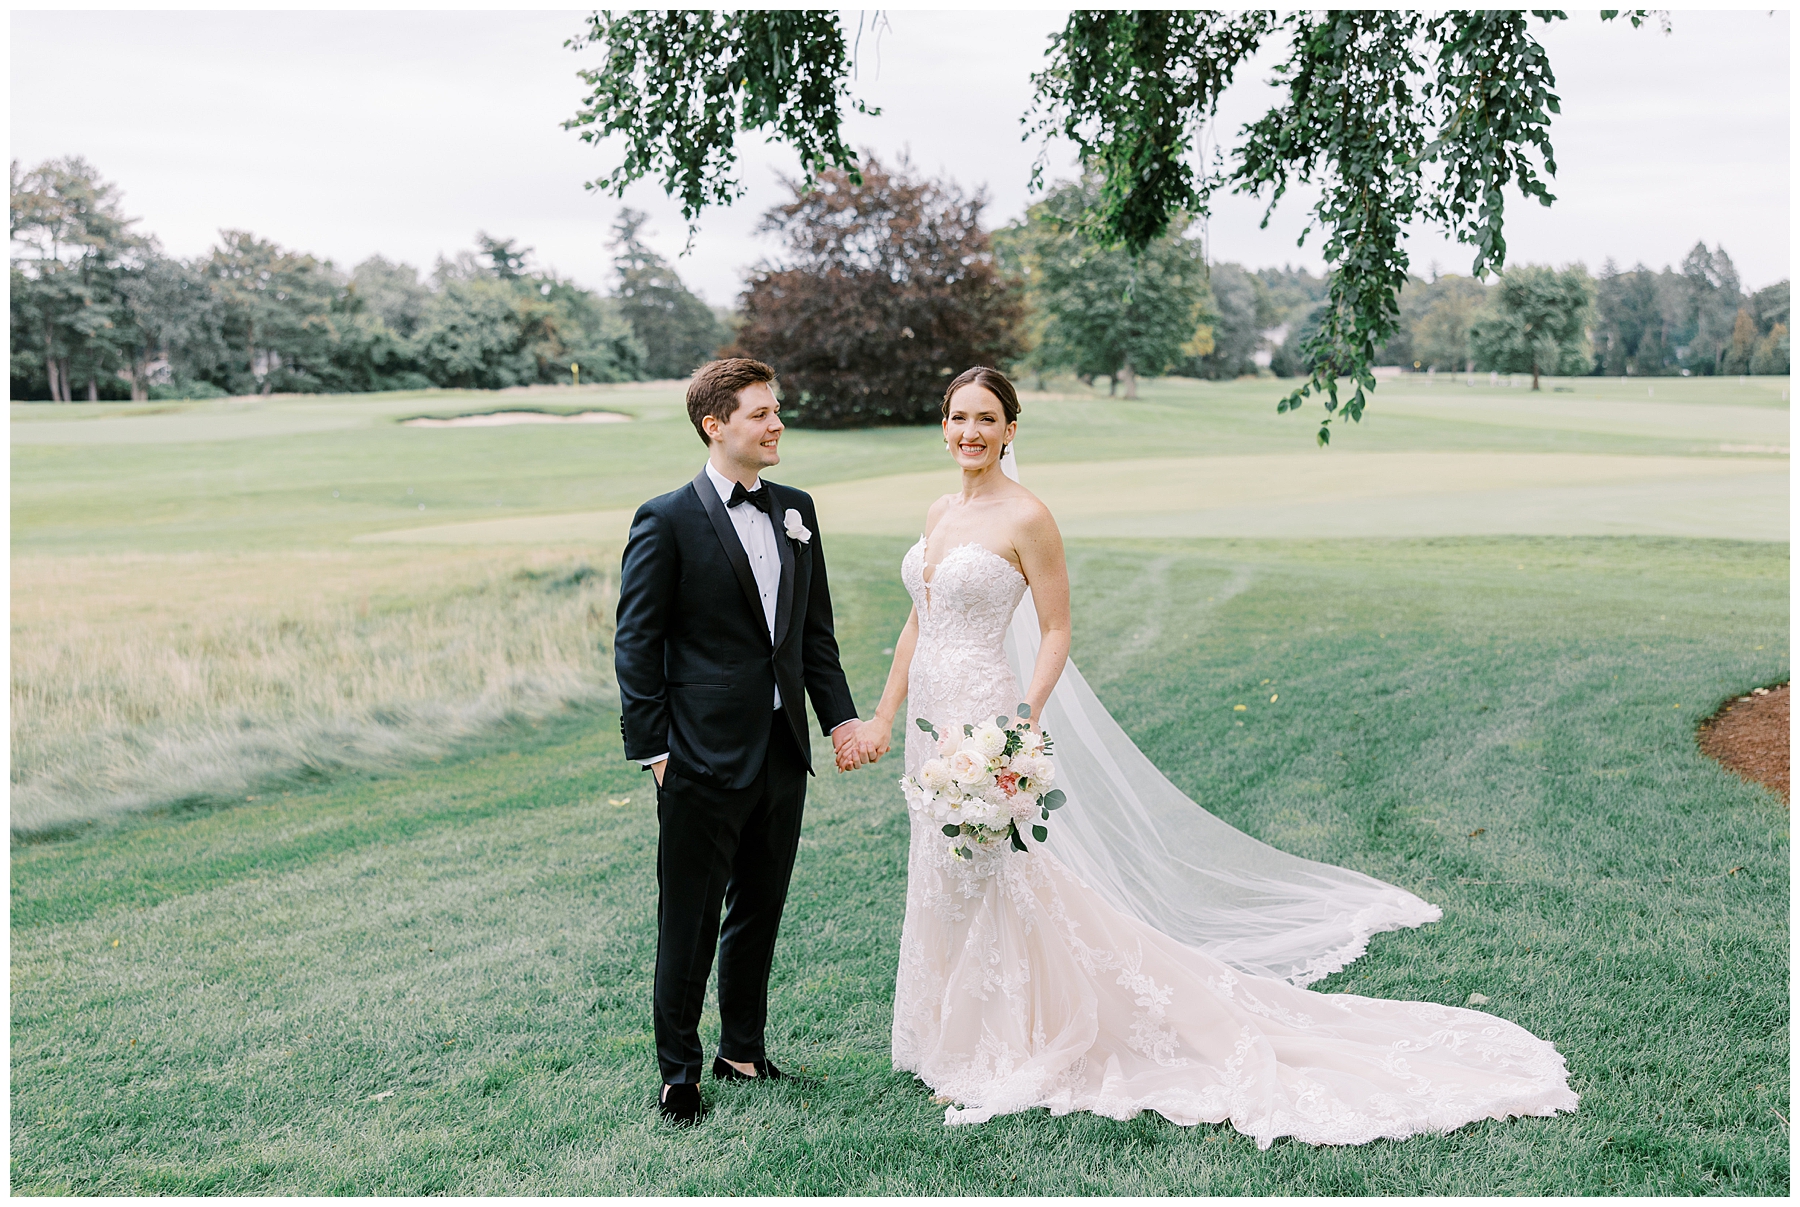 romantic wedding portraits at The Country Club in Brookline, MA